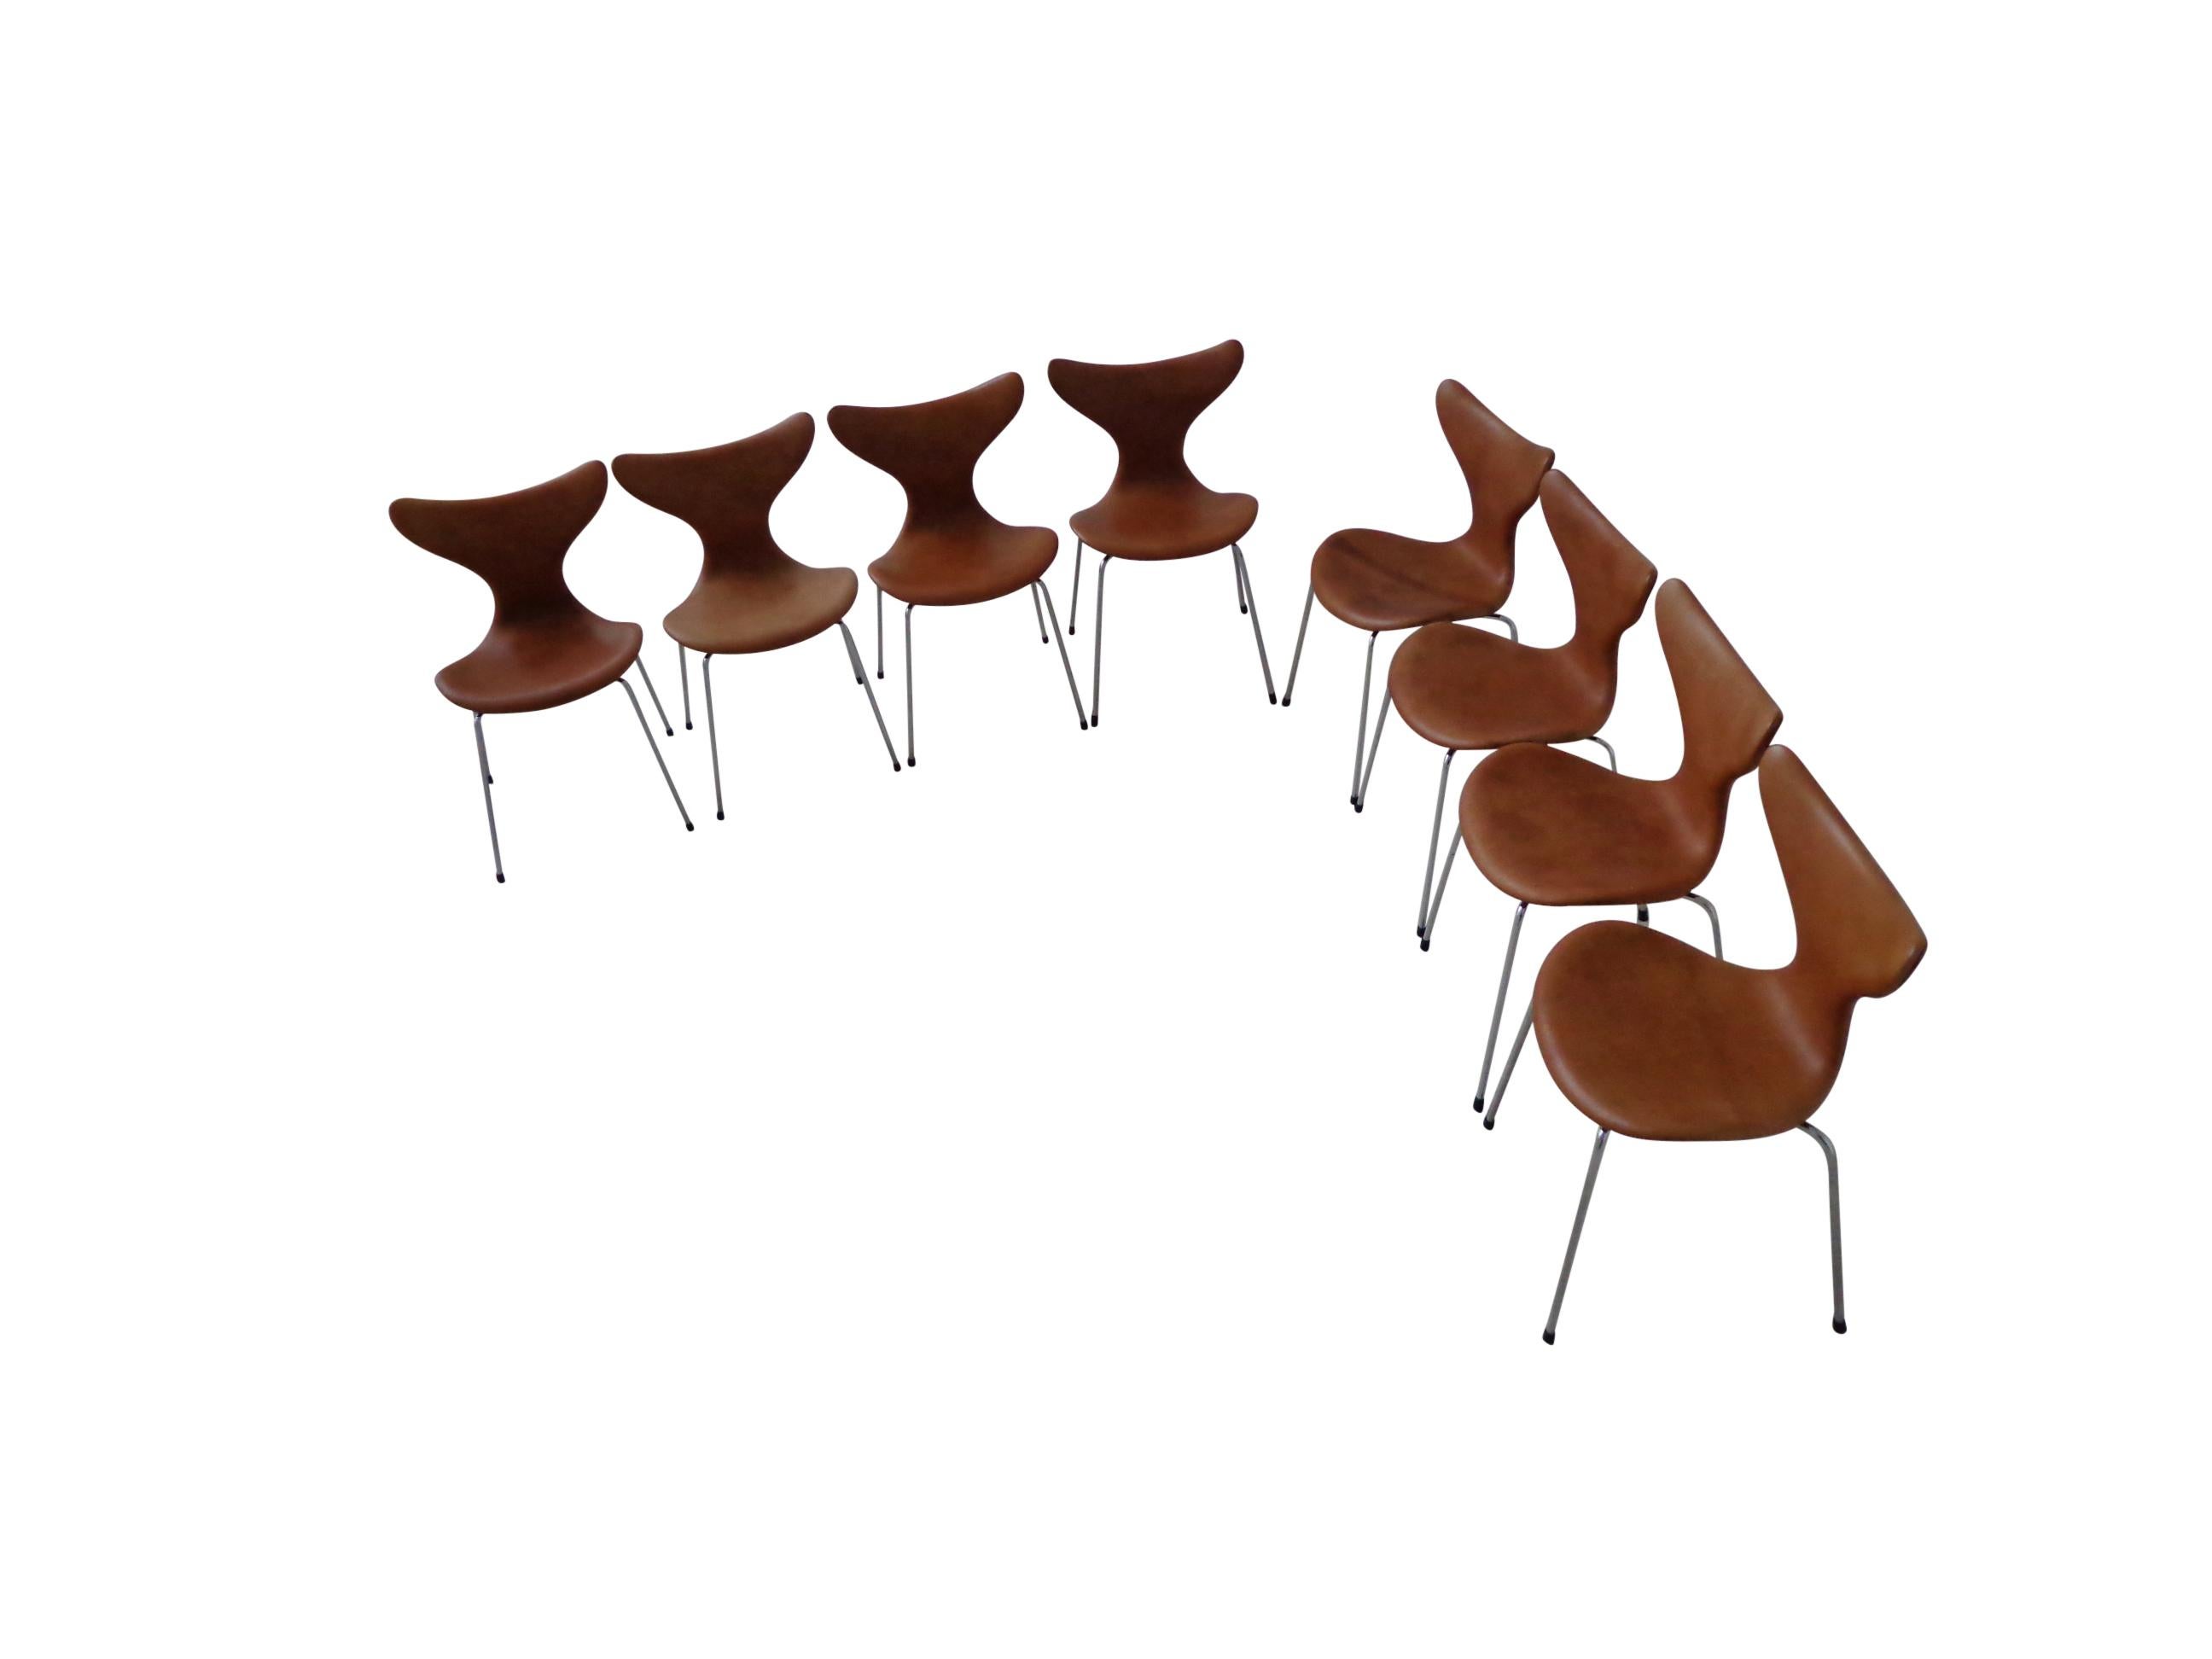 Late 20th Century Arne Jacobsen Dining Chairs Cognac Leather Model Lily 1970s Fritz Hansen Denmark